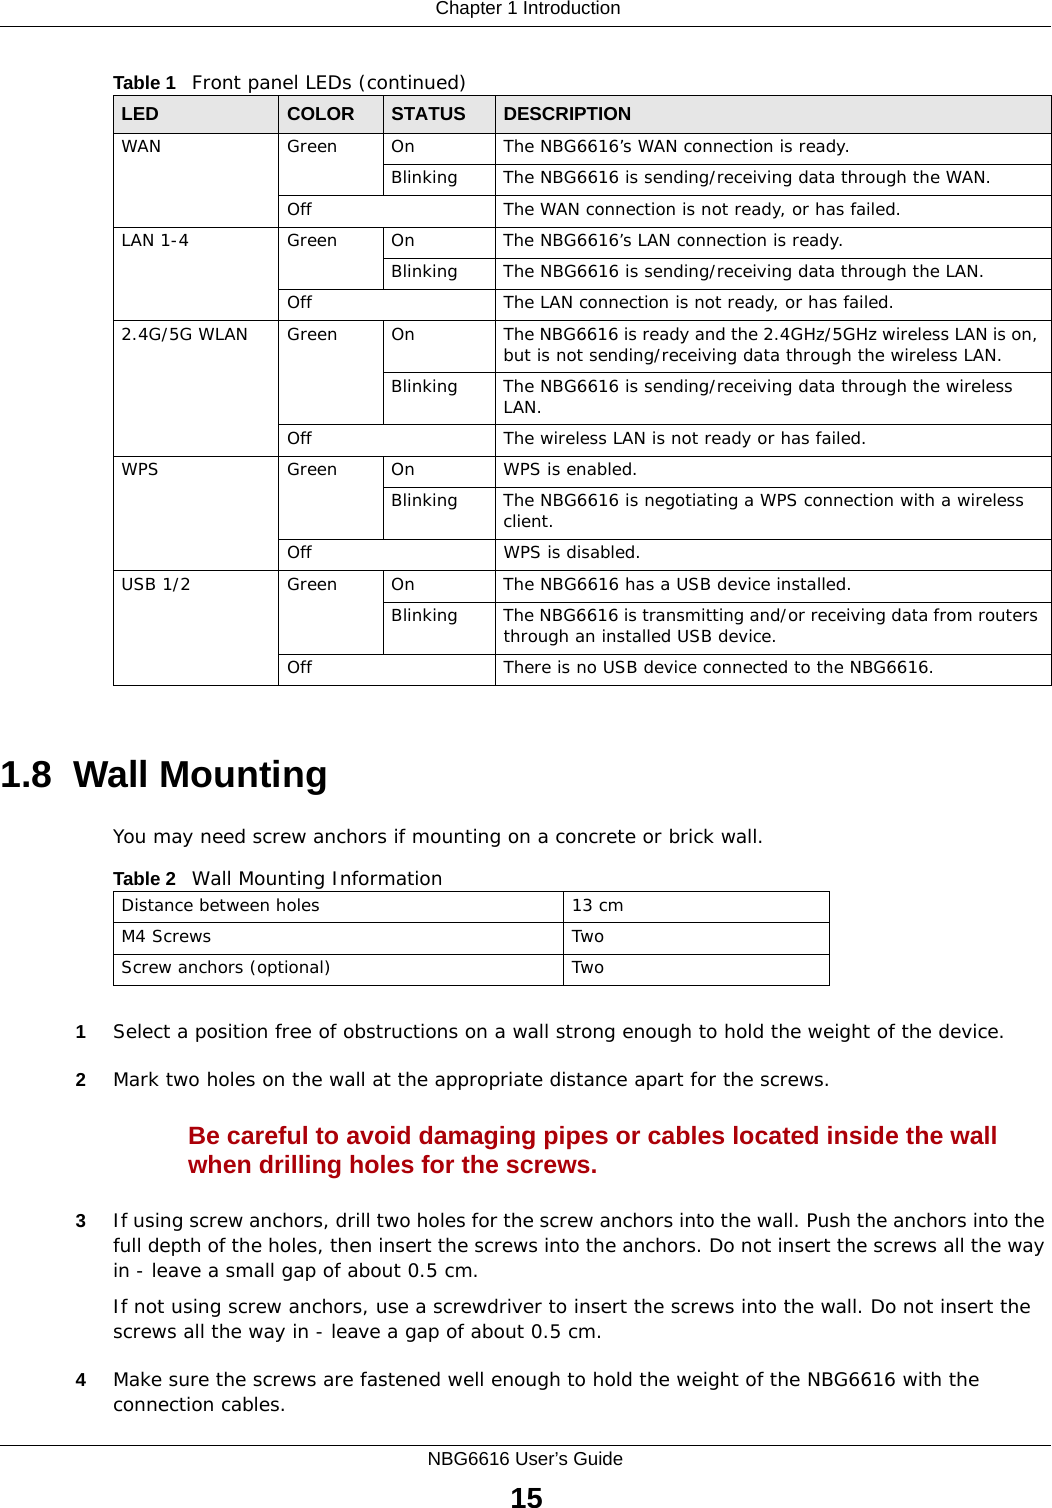  Chapter 1 IntroductionNBG6616 User’s Guide151.8  Wall MountingYou may need screw anchors if mounting on a concrete or brick wall.1Select a position free of obstructions on a wall strong enough to hold the weight of the device. 2Mark two holes on the wall at the appropriate distance apart for the screws.Be careful to avoid damaging pipes or cables located inside the wall when drilling holes for the screws.3If using screw anchors, drill two holes for the screw anchors into the wall. Push the anchors into the full depth of the holes, then insert the screws into the anchors. Do not insert the screws all the way in - leave a small gap of about 0.5 cm.If not using screw anchors, use a screwdriver to insert the screws into the wall. Do not insert the screws all the way in - leave a gap of about 0.5 cm.4Make sure the screws are fastened well enough to hold the weight of the NBG6616 with the connection cables. WAN Green On The NBG6616’s WAN connection is ready. Blinking The NBG6616 is sending/receiving data through the WAN.Off The WAN connection is not ready, or has failed.LAN 1-4 Green On The NBG6616’s LAN connection is ready. Blinking The NBG6616 is sending/receiving data through the LAN.Off The LAN connection is not ready, or has failed.2.4G/5G WLAN Green On The NBG6616 is ready and the 2.4GHz/5GHz wireless LAN is on, but is not sending/receiving data through the wireless LAN. Blinking The NBG6616 is sending/receiving data through the wireless LAN.Off The wireless LAN is not ready or has failed.WPS Green On WPS is enabled.Blinking The NBG6616 is negotiating a WPS connection with a wireless client.Off WPS is disabled.USB 1/2 Green On The NBG6616 has a USB device installed.Blinking The NBG6616 is transmitting and/or receiving data from routers through an installed USB device.Off There is no USB device connected to the NBG6616.Table 1   Front panel LEDs (continued)LED COLOR STATUS DESCRIPTIONTable 2   Wall Mounting InformationDistance between holes 13 cmM4 Screws TwoScrew anchors (optional) Two